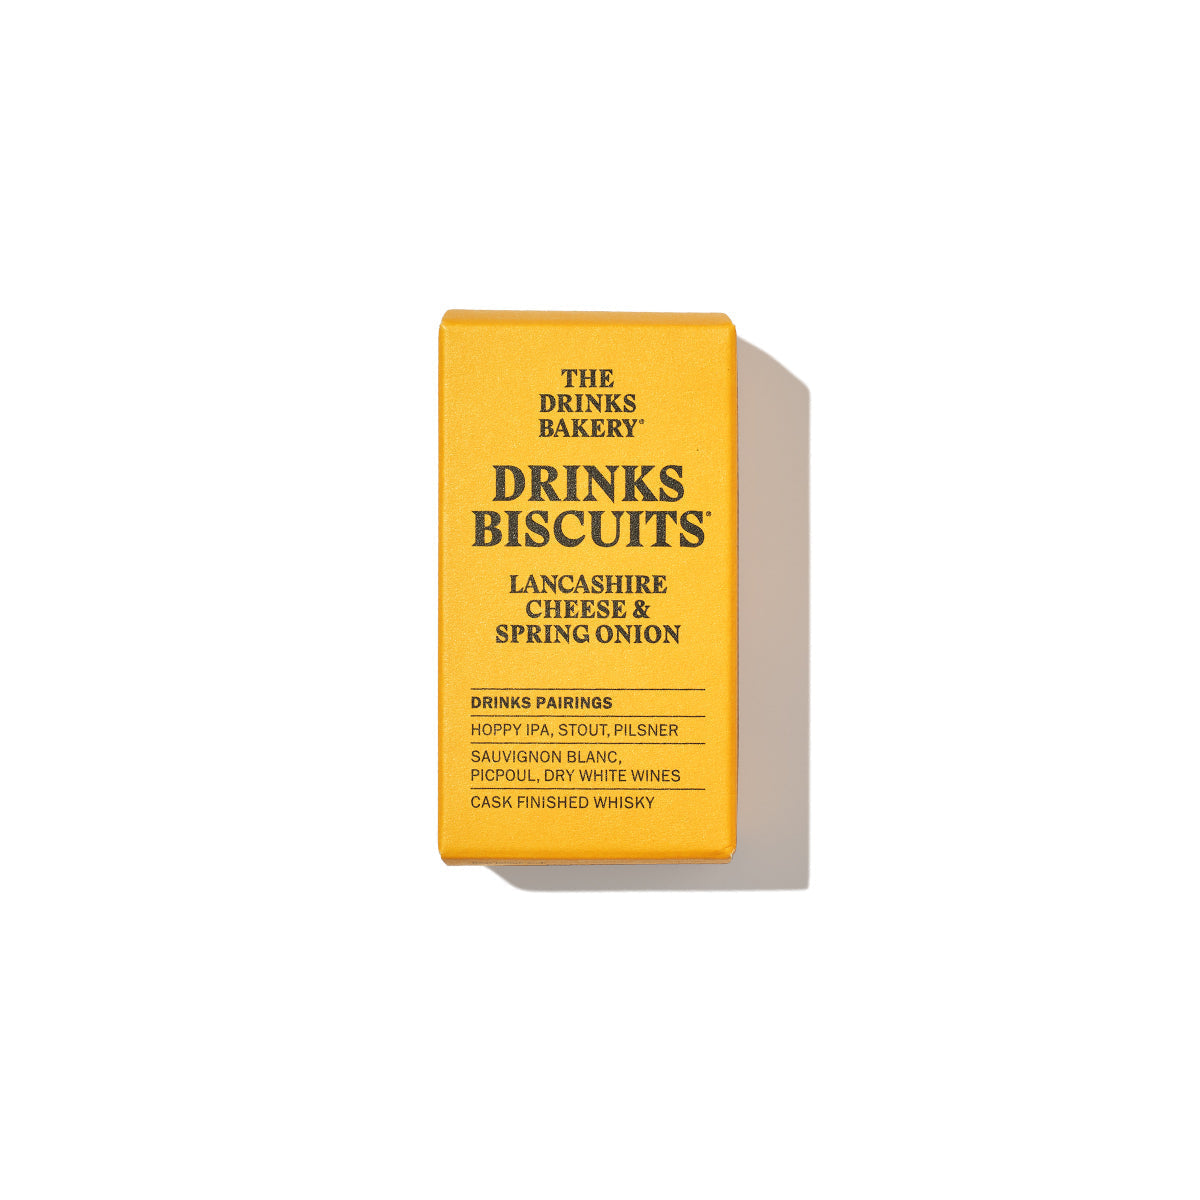 Drinks-Biscuits-36g-Yellow-1200W_2212a7dd-863b-4205-a963-792f126e99a9.jpg